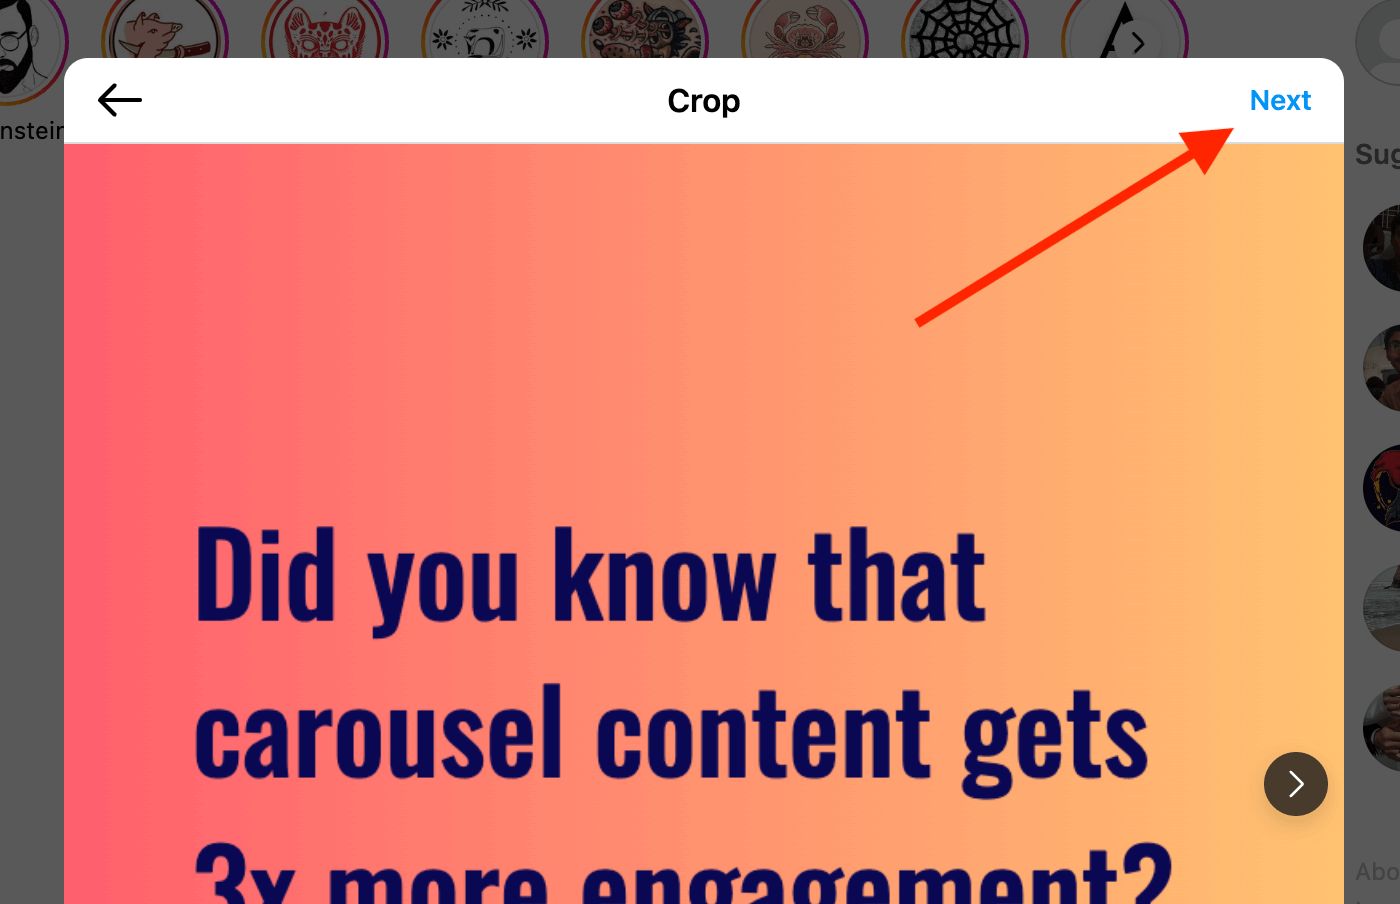 How to post a Instagram Carousel: Step 5 - Click "Next"